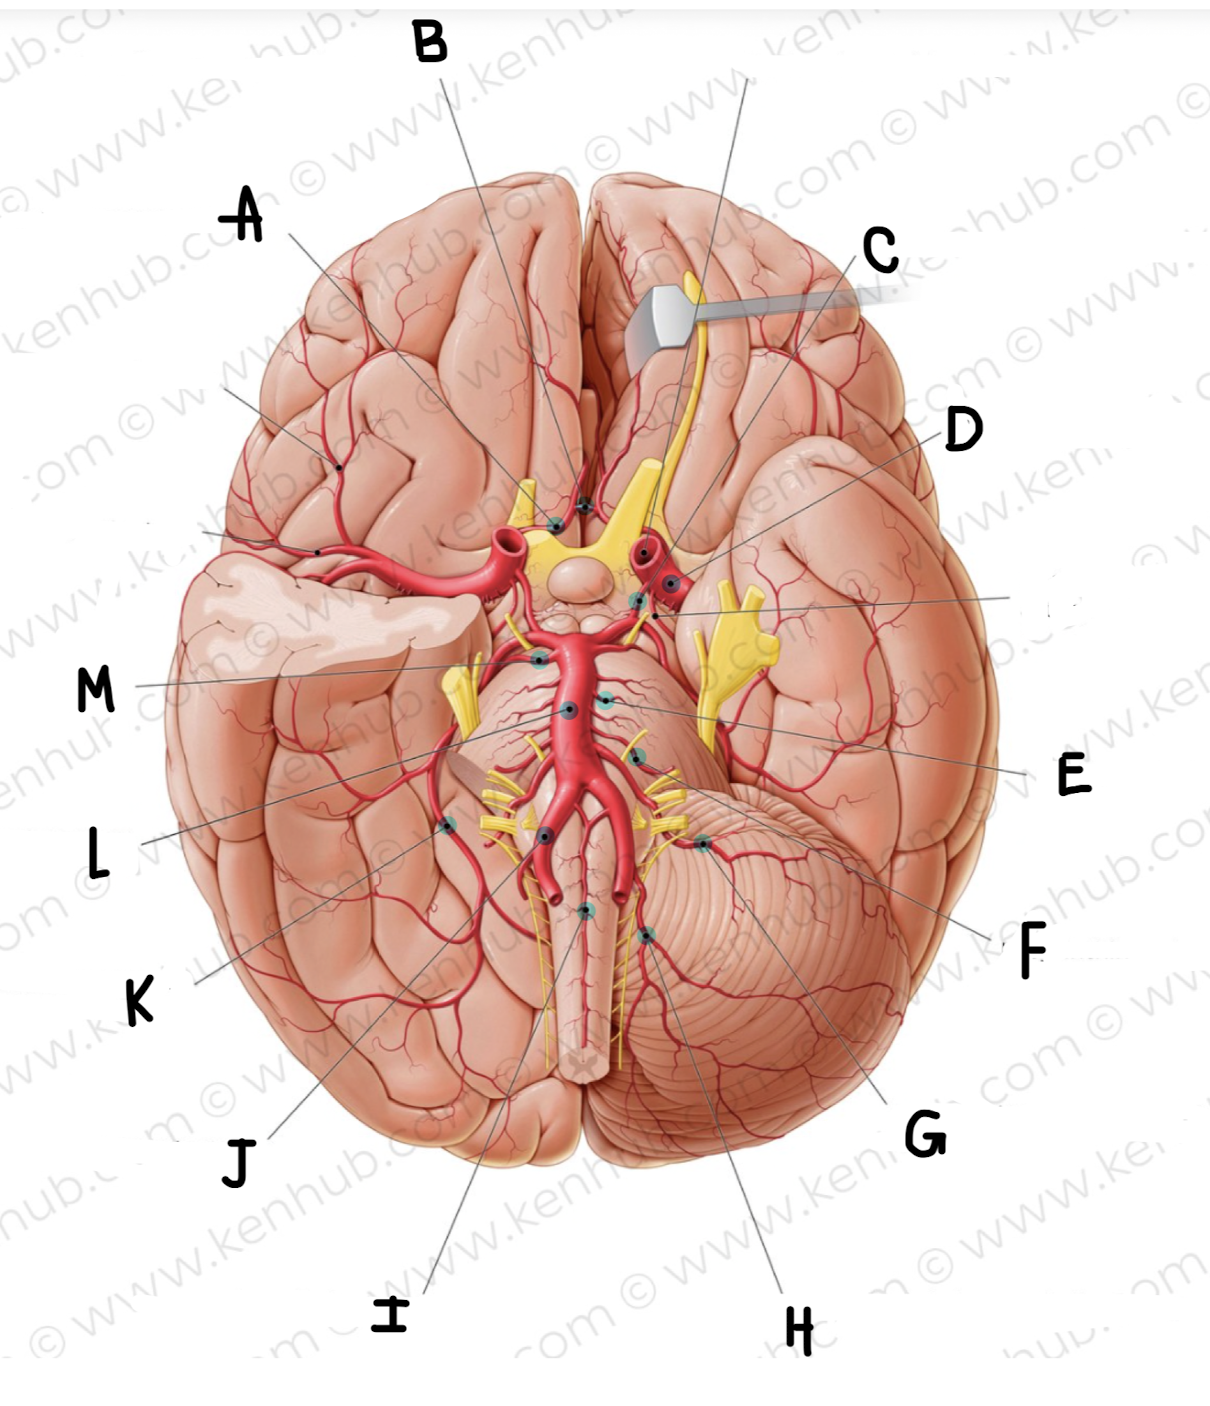 <p>What is the name of the artery labeled I?</p>